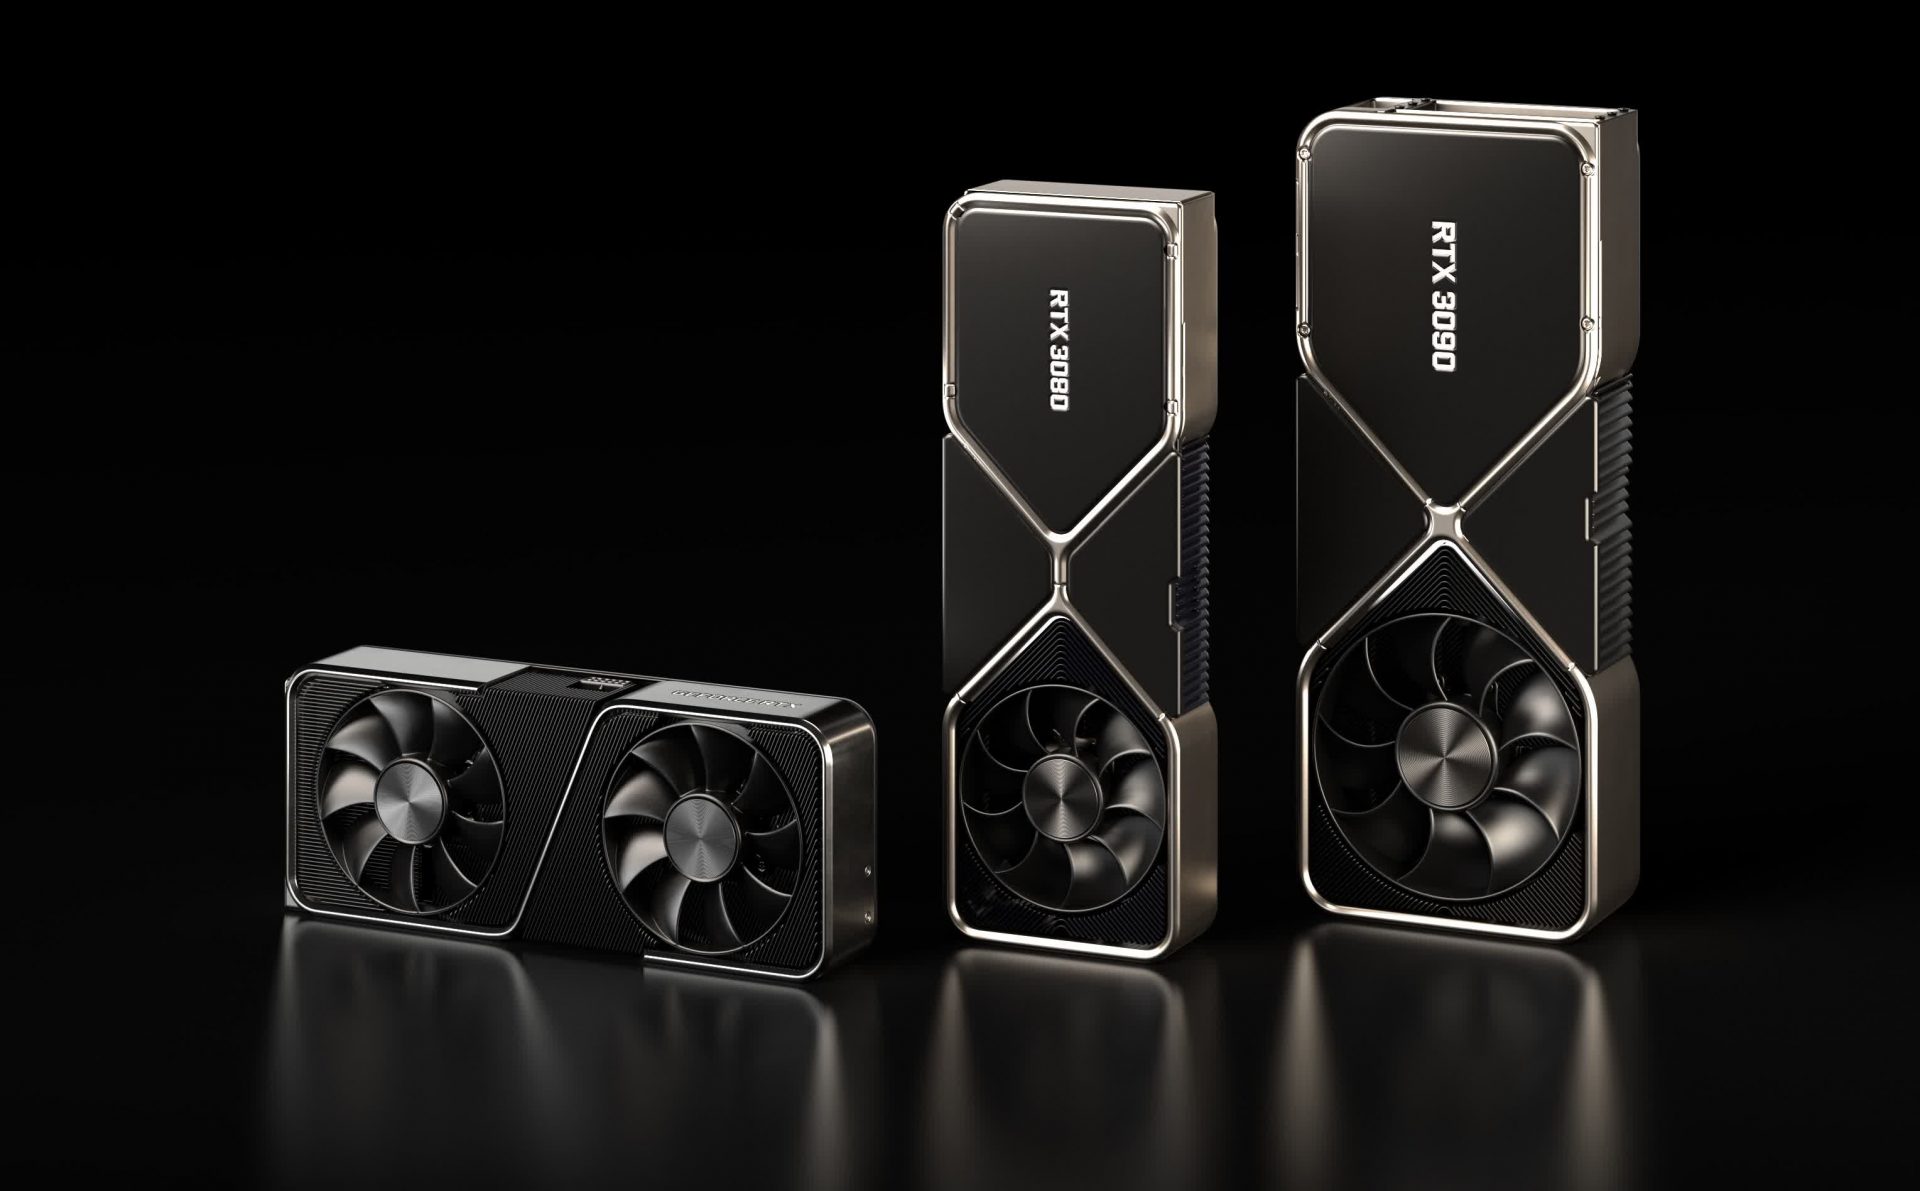 Nvidia pushes ray-traced gaming forward with new GeForce RTX 3000 GPUs